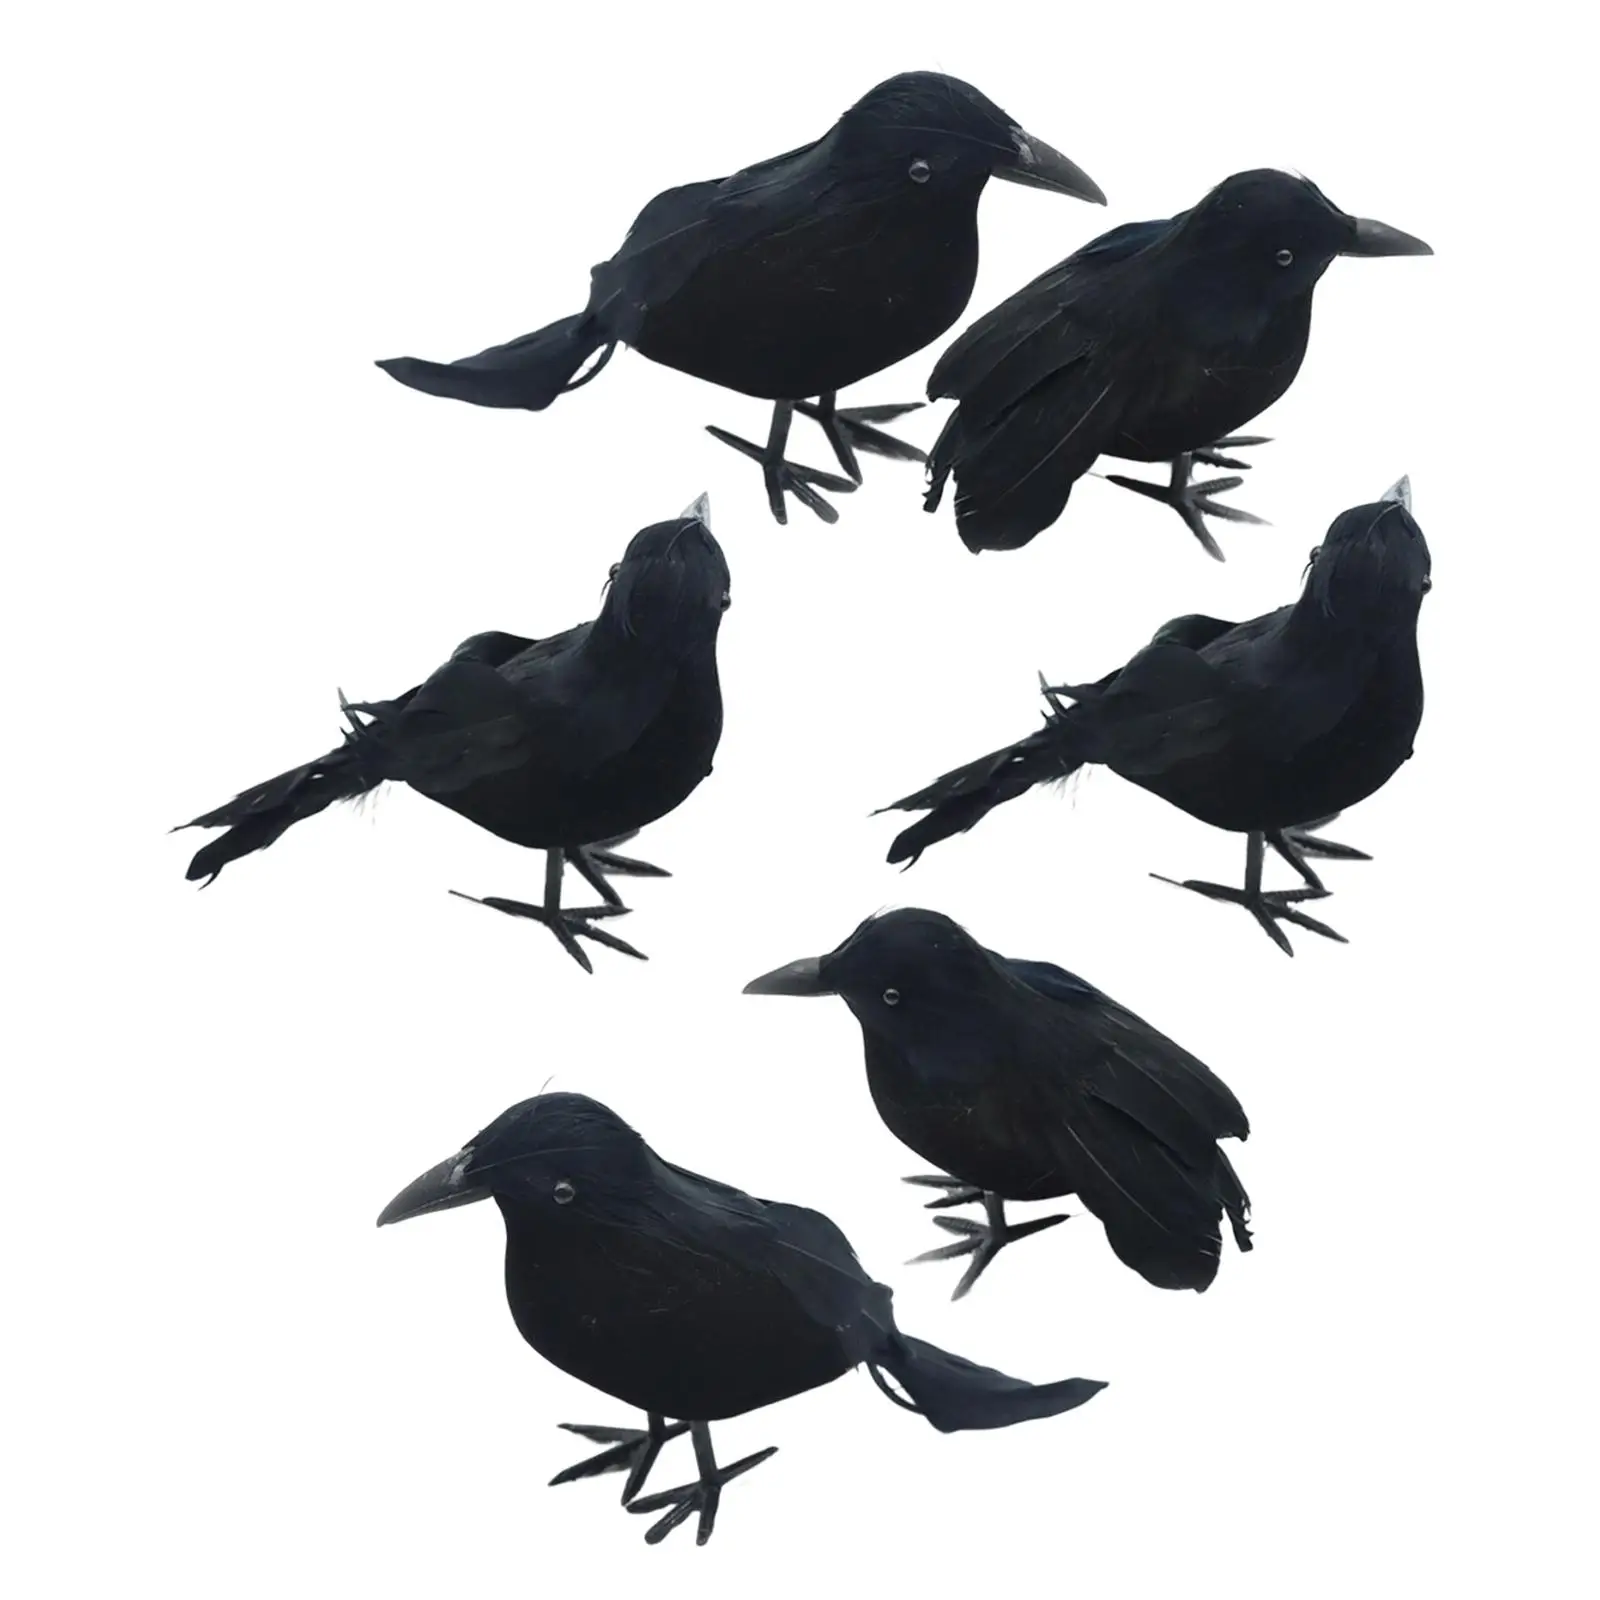 6 Pieces Realistic Halloween Crows Halloween Crows and Ravens Decor for Party Event Fancy dress Decorative